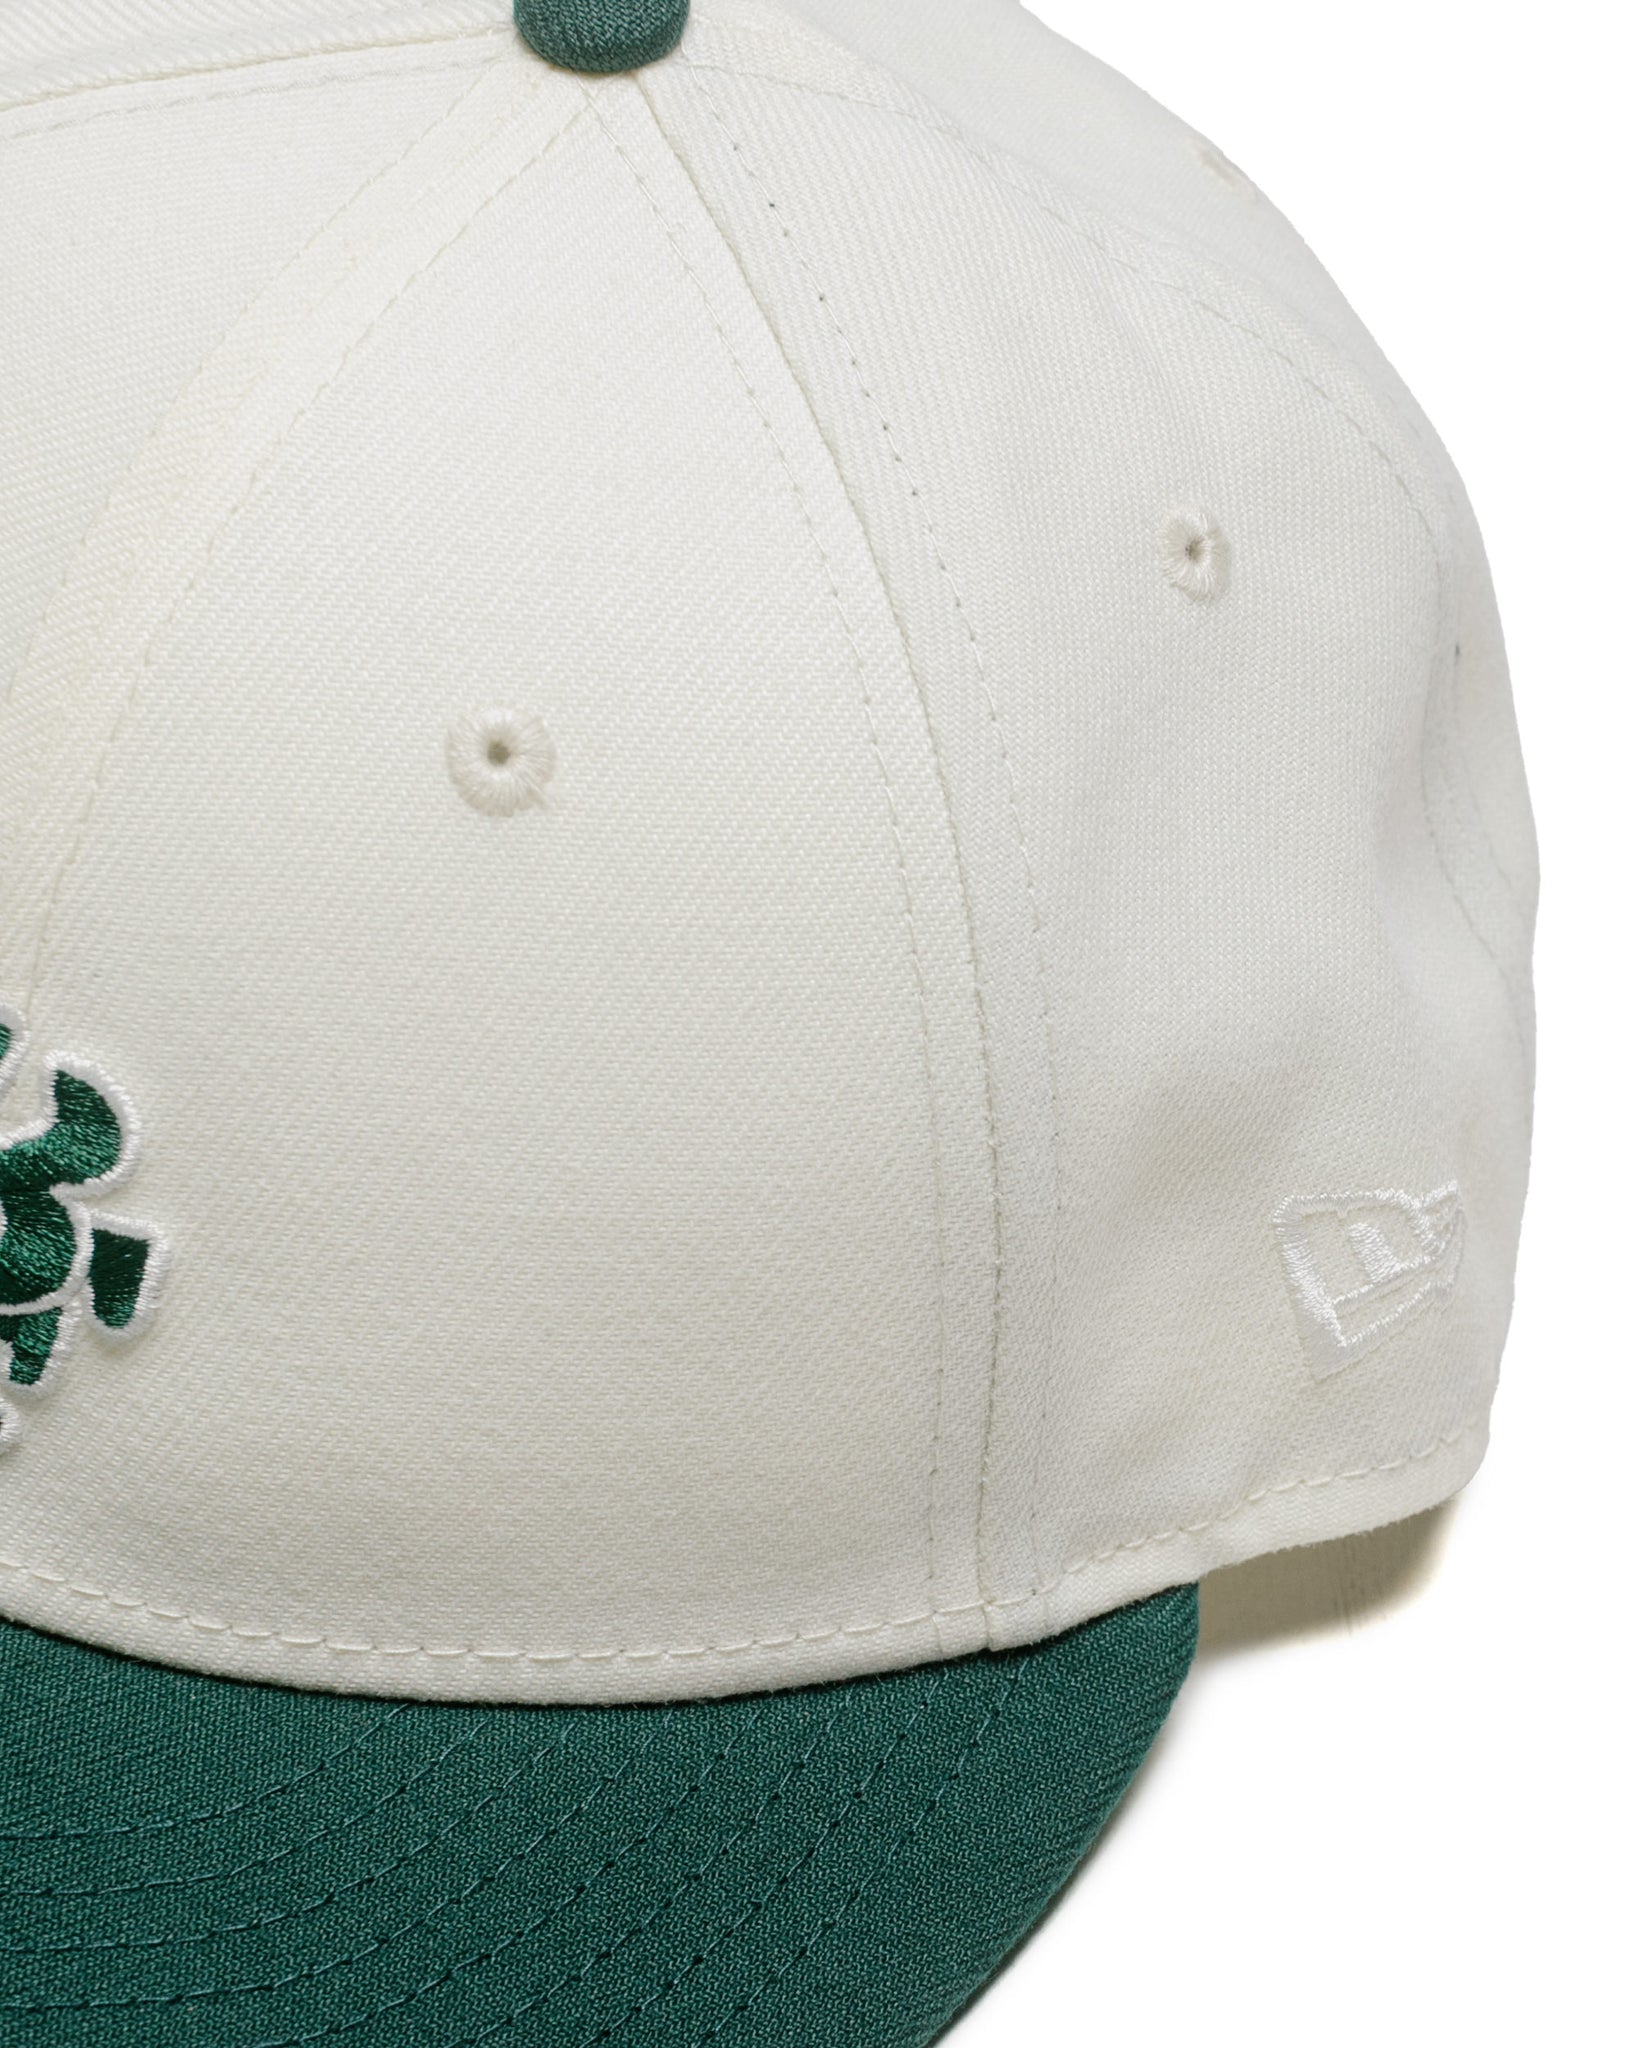 Lost & Found x New Era Low Profile 59FIFTY Cap WhiteGreen side